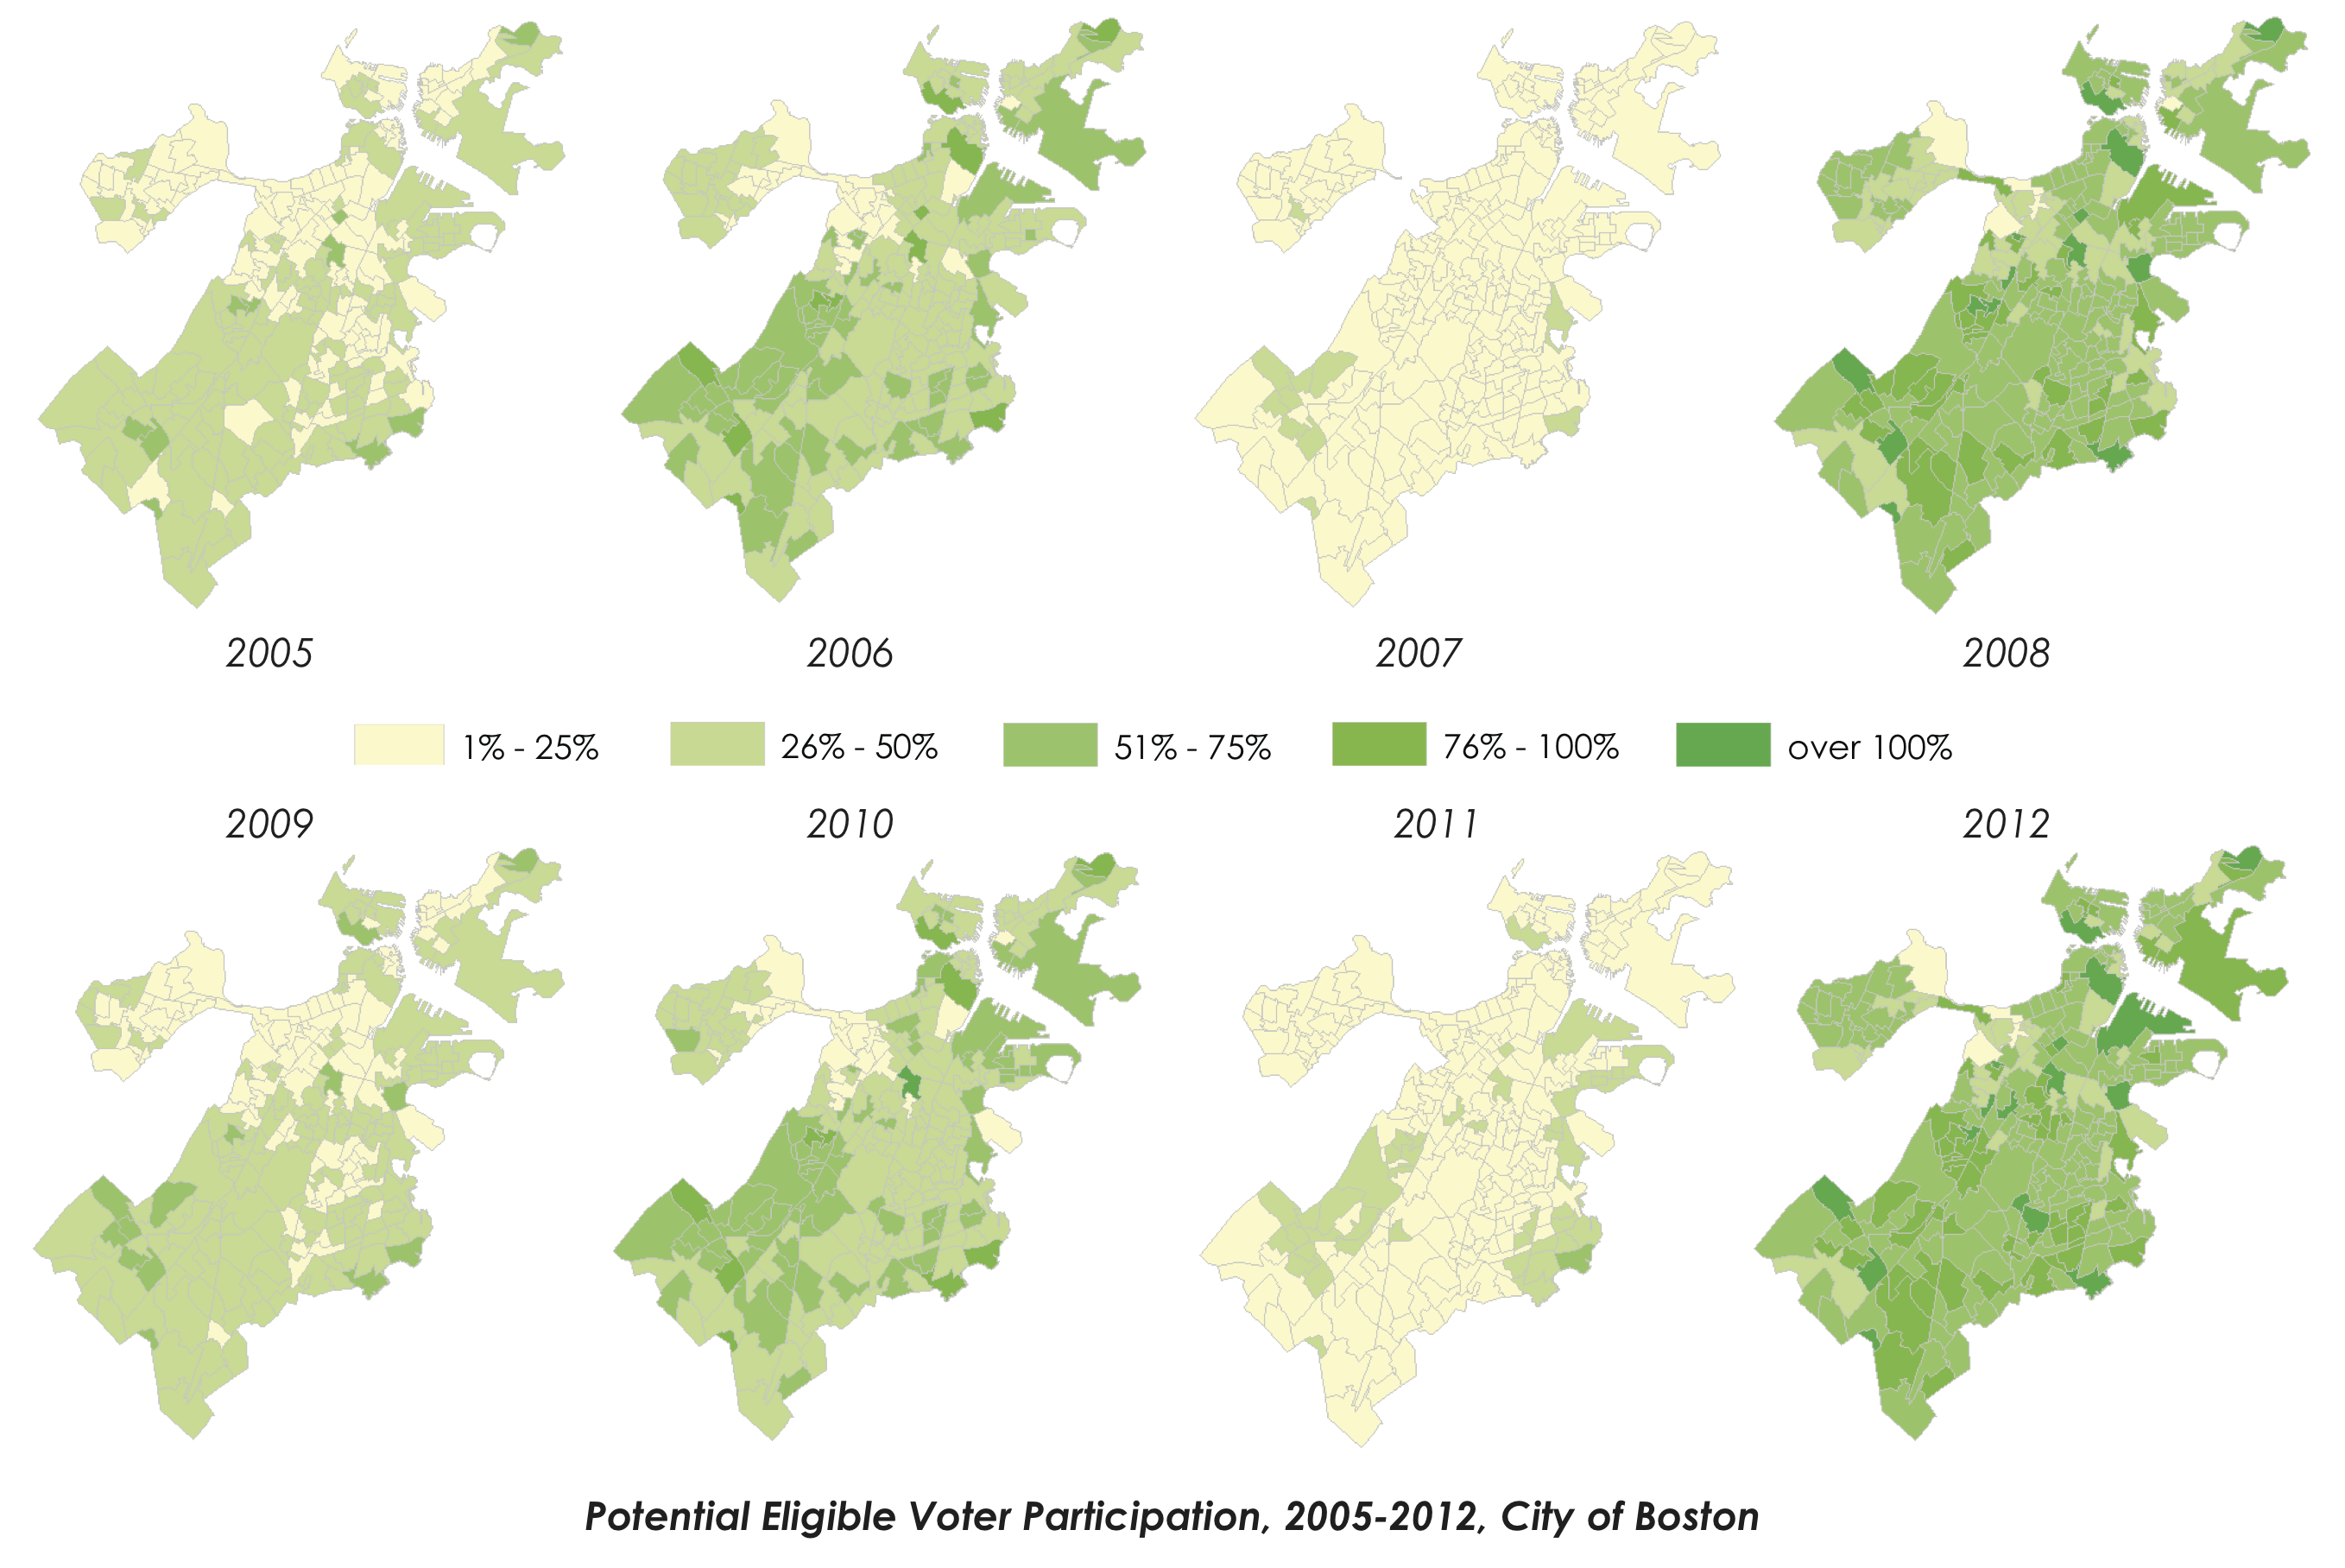 Potential Eligible Voter Participation, 2005-2012, City of Boston